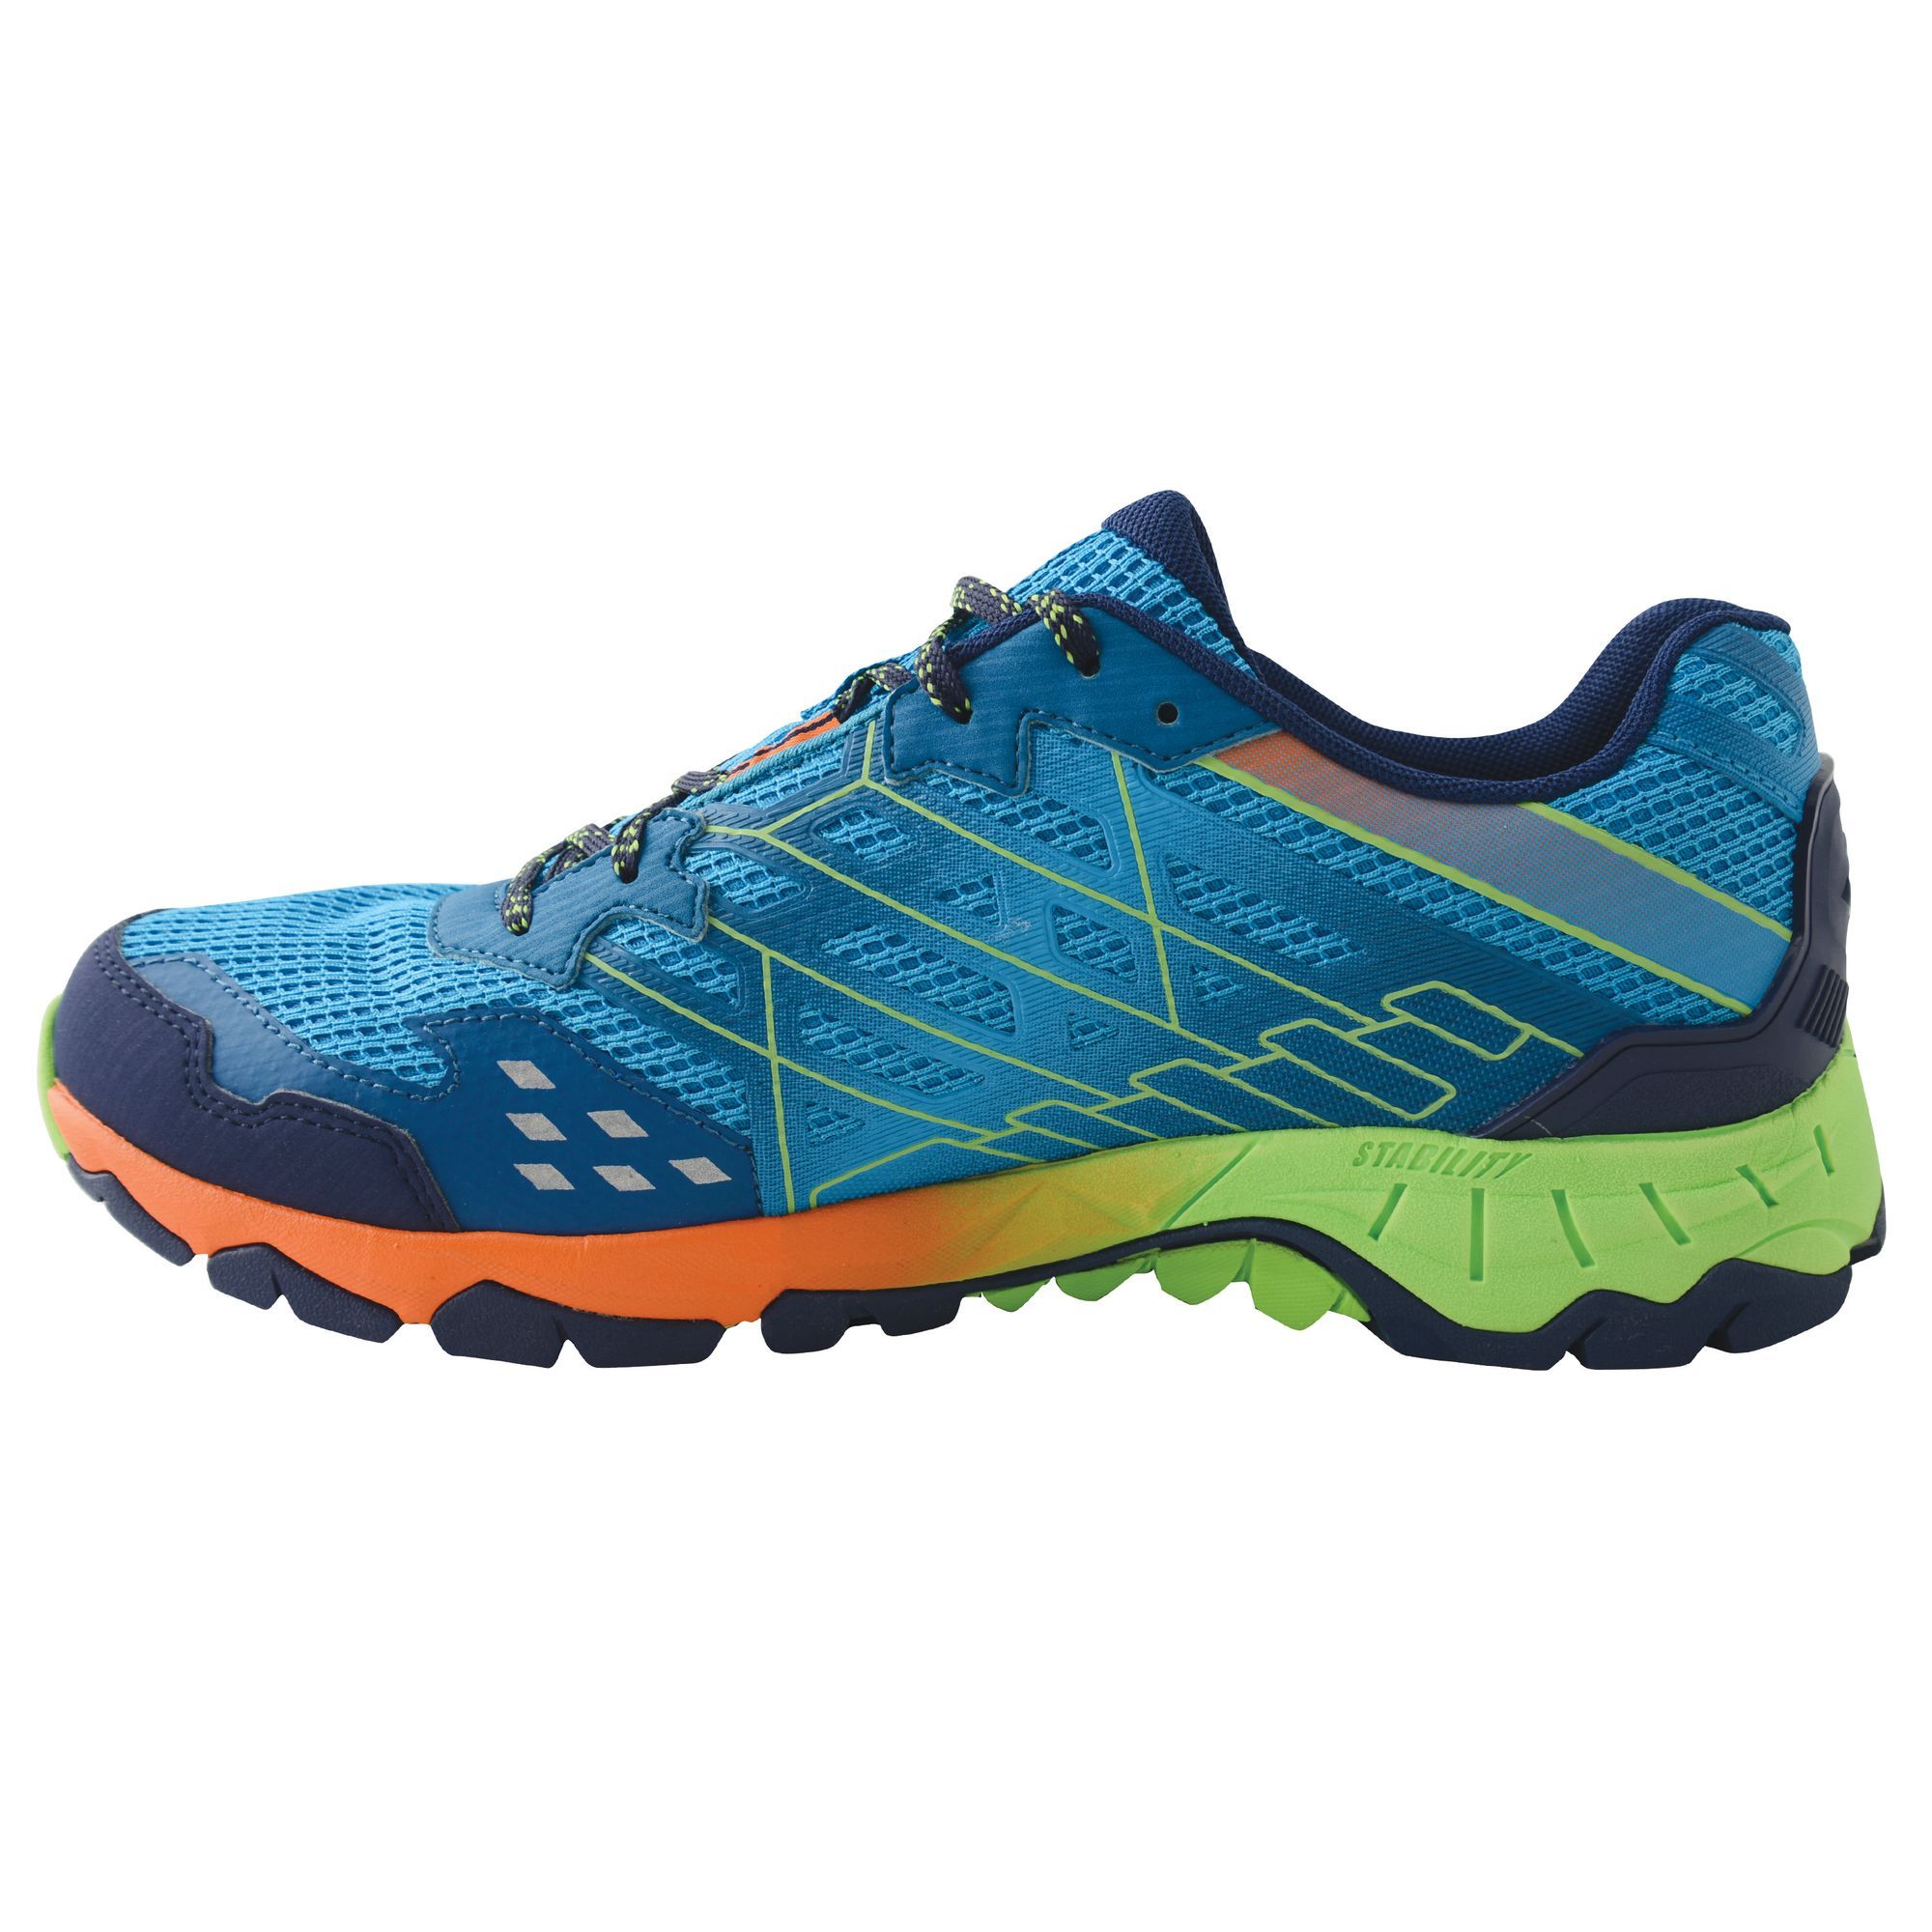 Material: 50% thermo plastic polyurethane/25% polyester/15% polyurethane/10% rubber. Lightweight and versatile trail shoe. Made for stability and grip. Breathable mesh upper construction with supportive PU overlays. Free foot lacing system minimises pressure on the top of the foot allowing blood to flow freely. TPR heel mould protects and stabilises the ankle. Shock absorbing EVA midsole cushion feet from impact. Multi-directional lugs give exceptional traction and braking power at the heel. Double eyelet for secure heel hold.